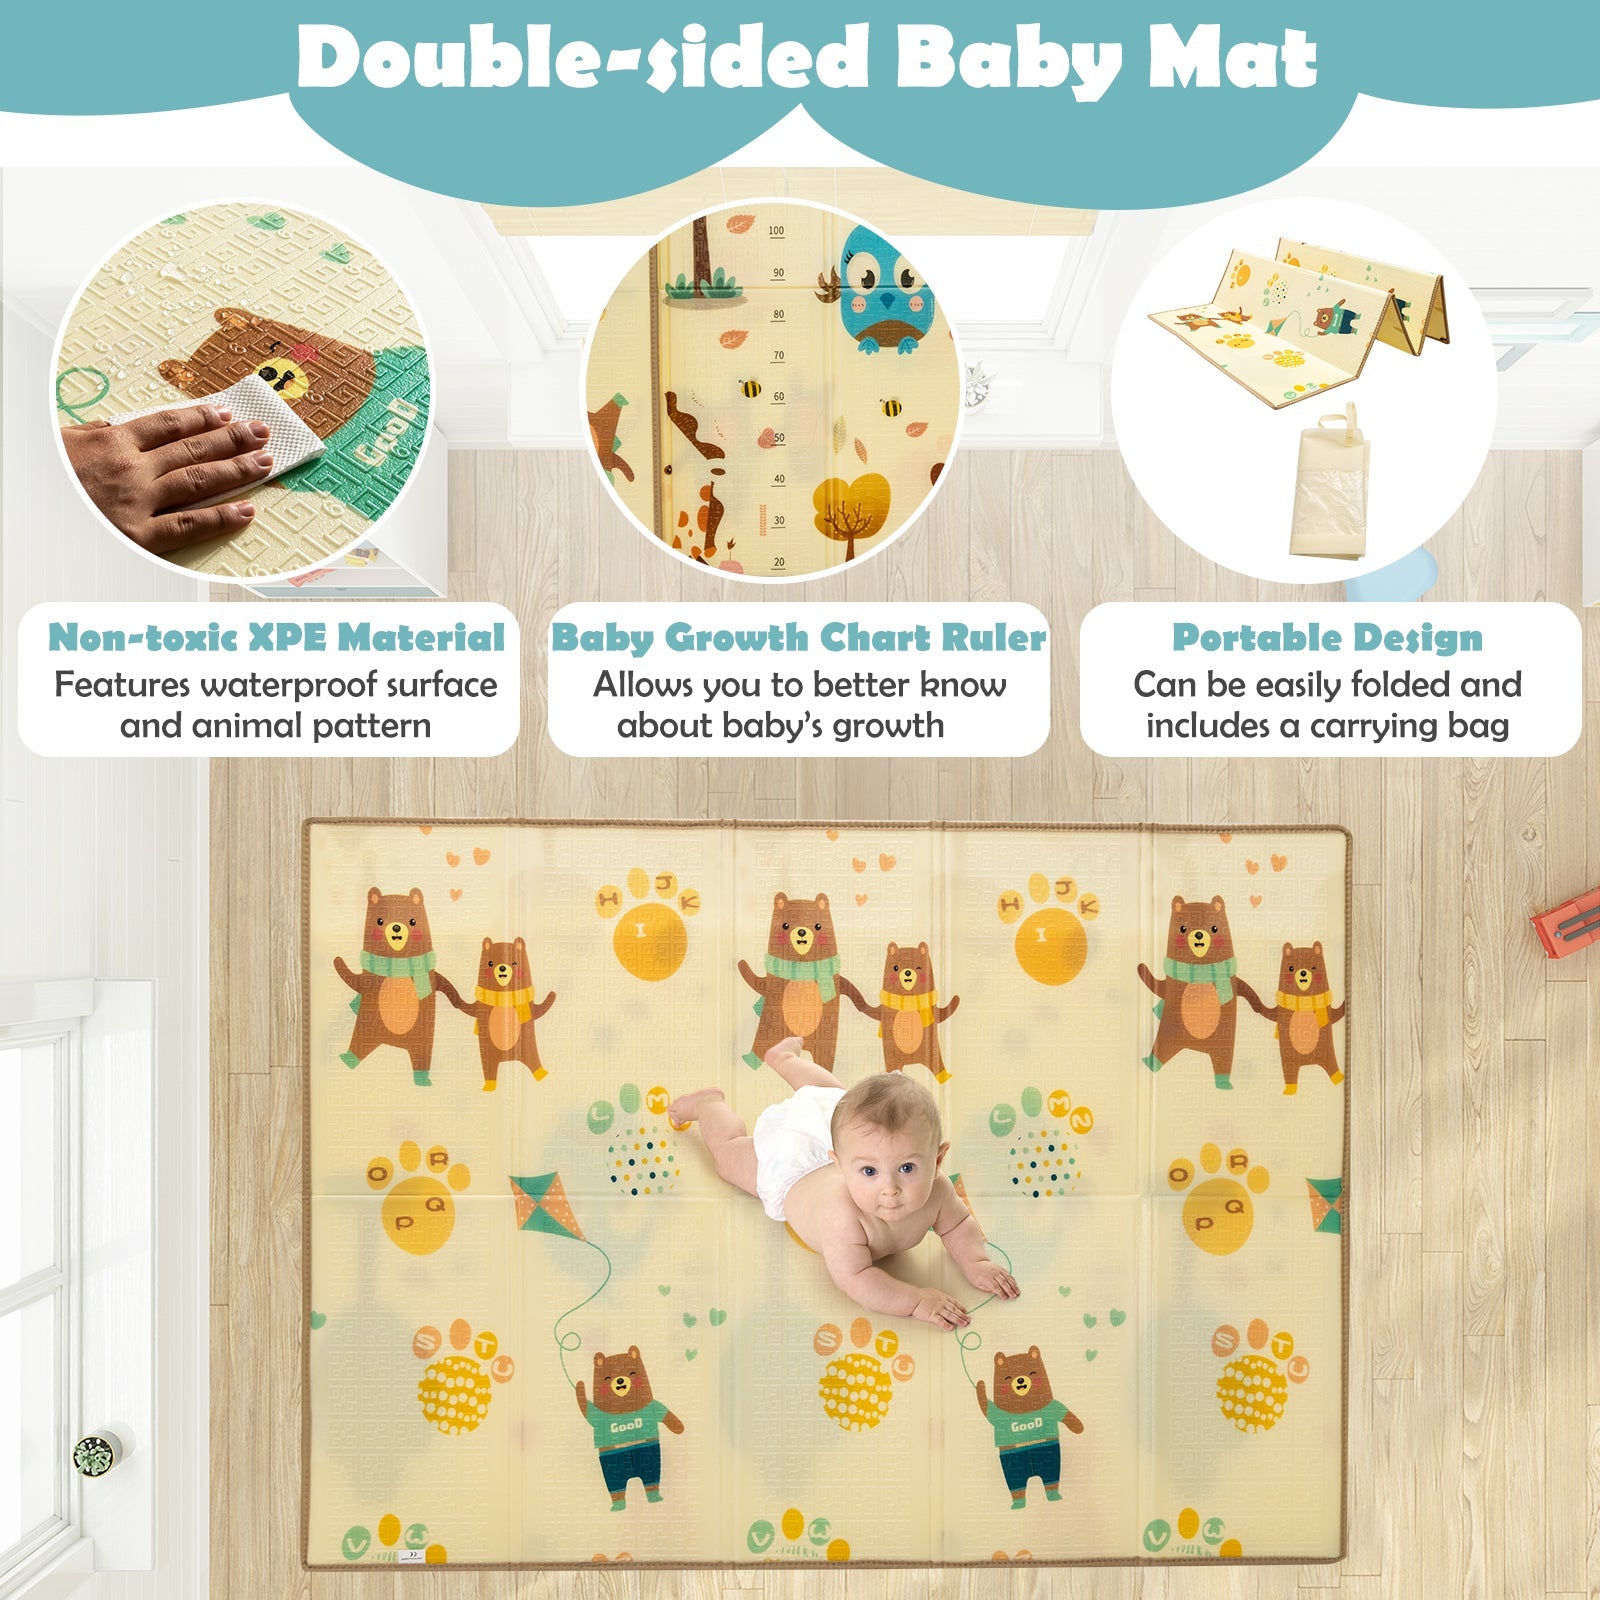 Baby Play mat Features